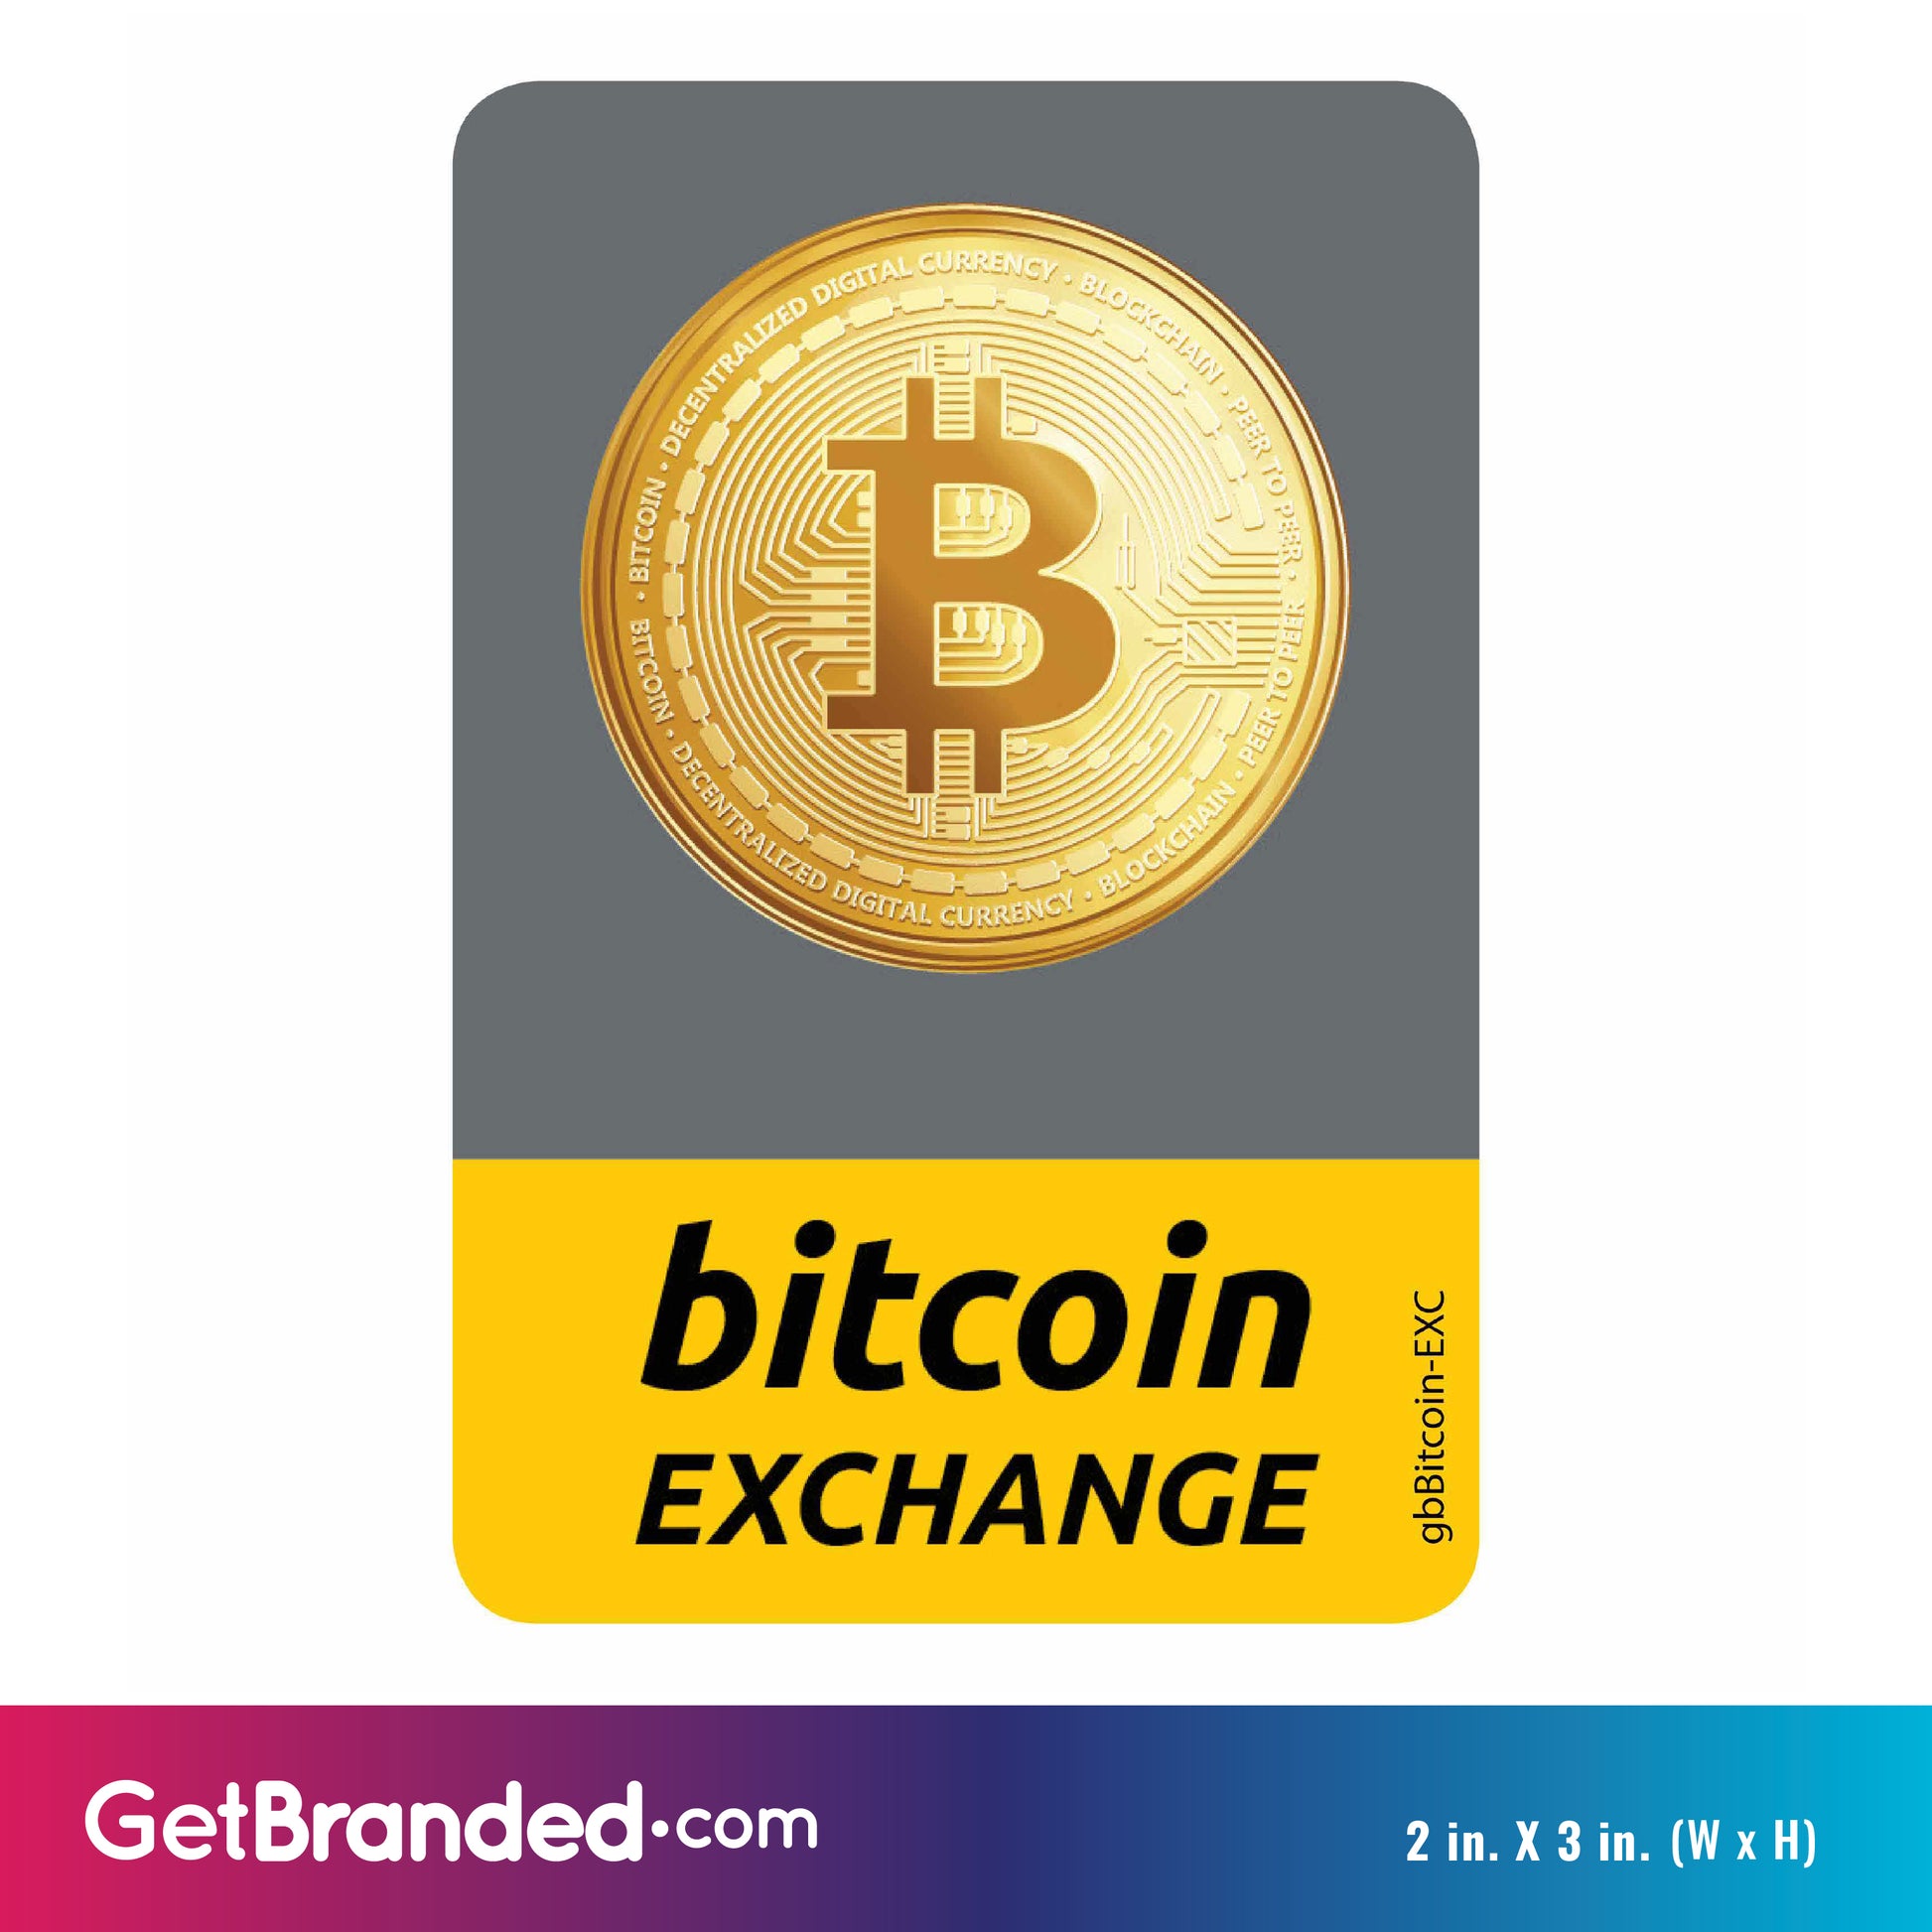 Bitcoin Exchange Decal size guide. 2 inches by 3 inches in size.